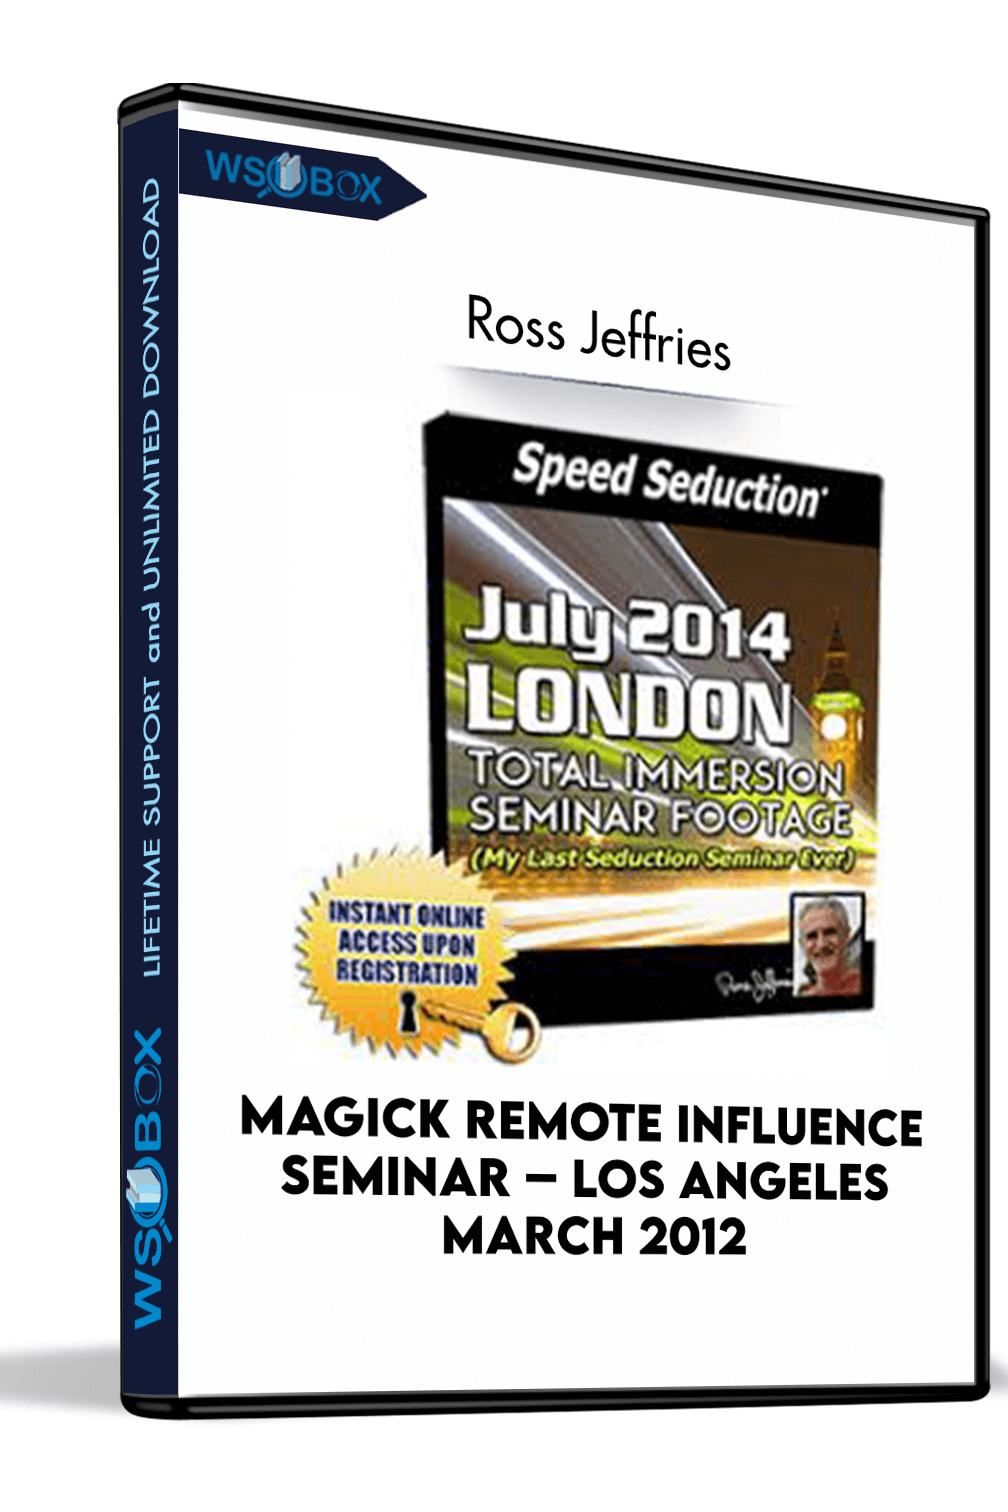 magick-remote-influence-seminar-los-angeles-march-2012-ross-jeffries